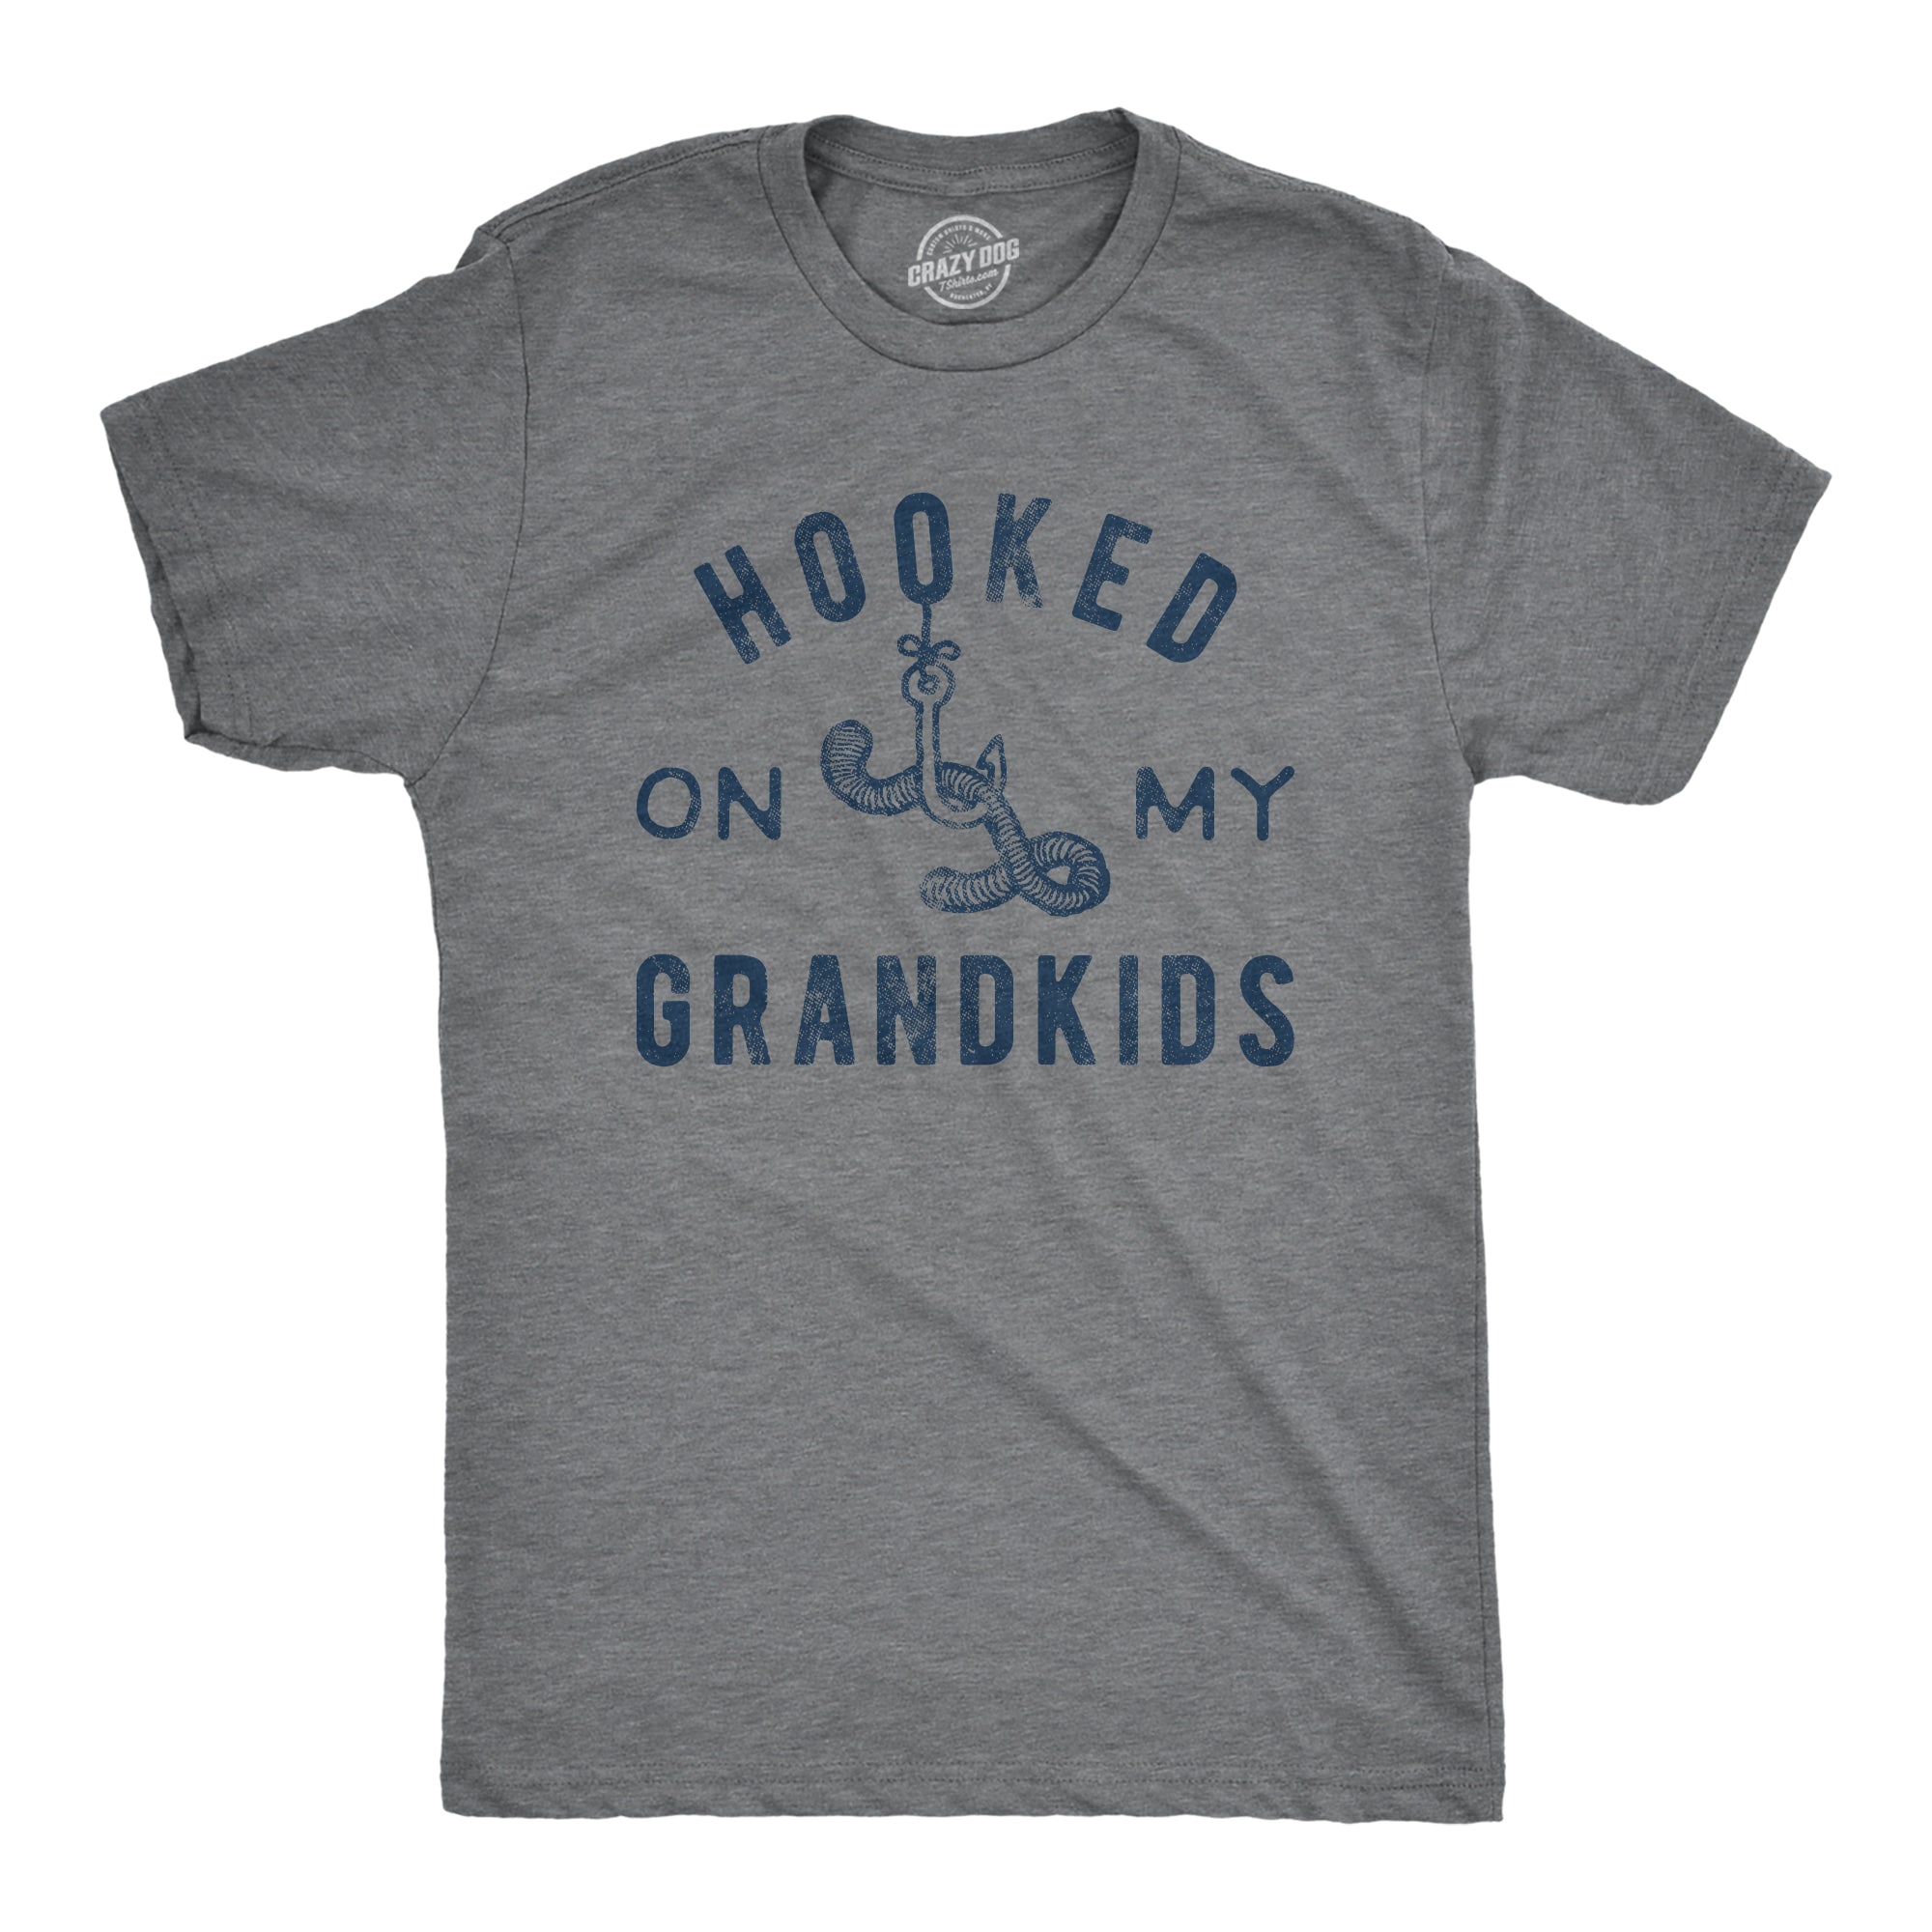 Funny Dark Heather Grey - Hooked Grandkids Hooked On My Grandkids Mens T Shirt Nerdy Father's Day Grandfather Fishing Tee